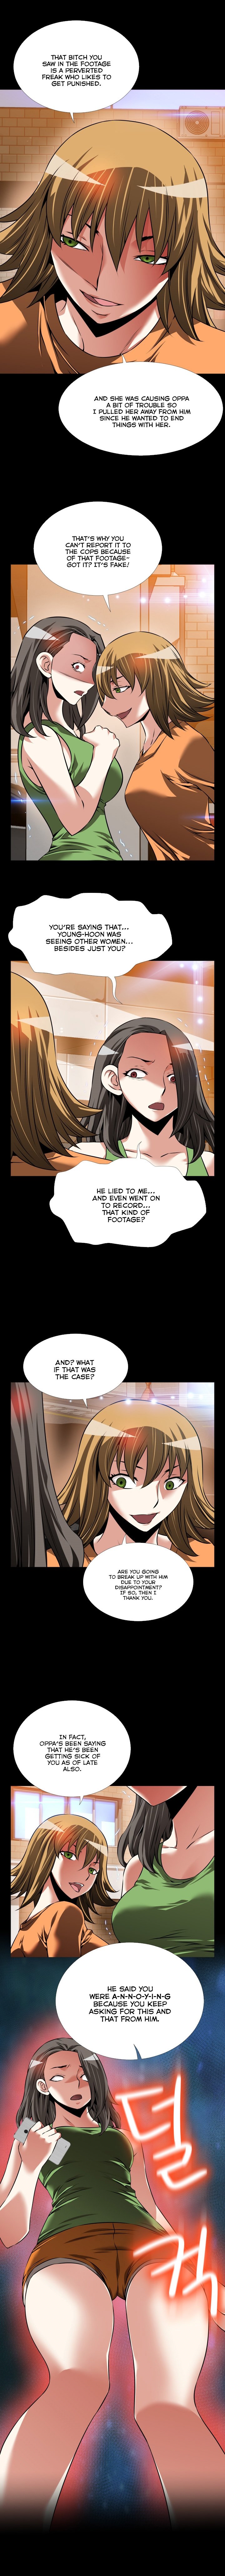 Love Parameter - Chapter 92 Page 7